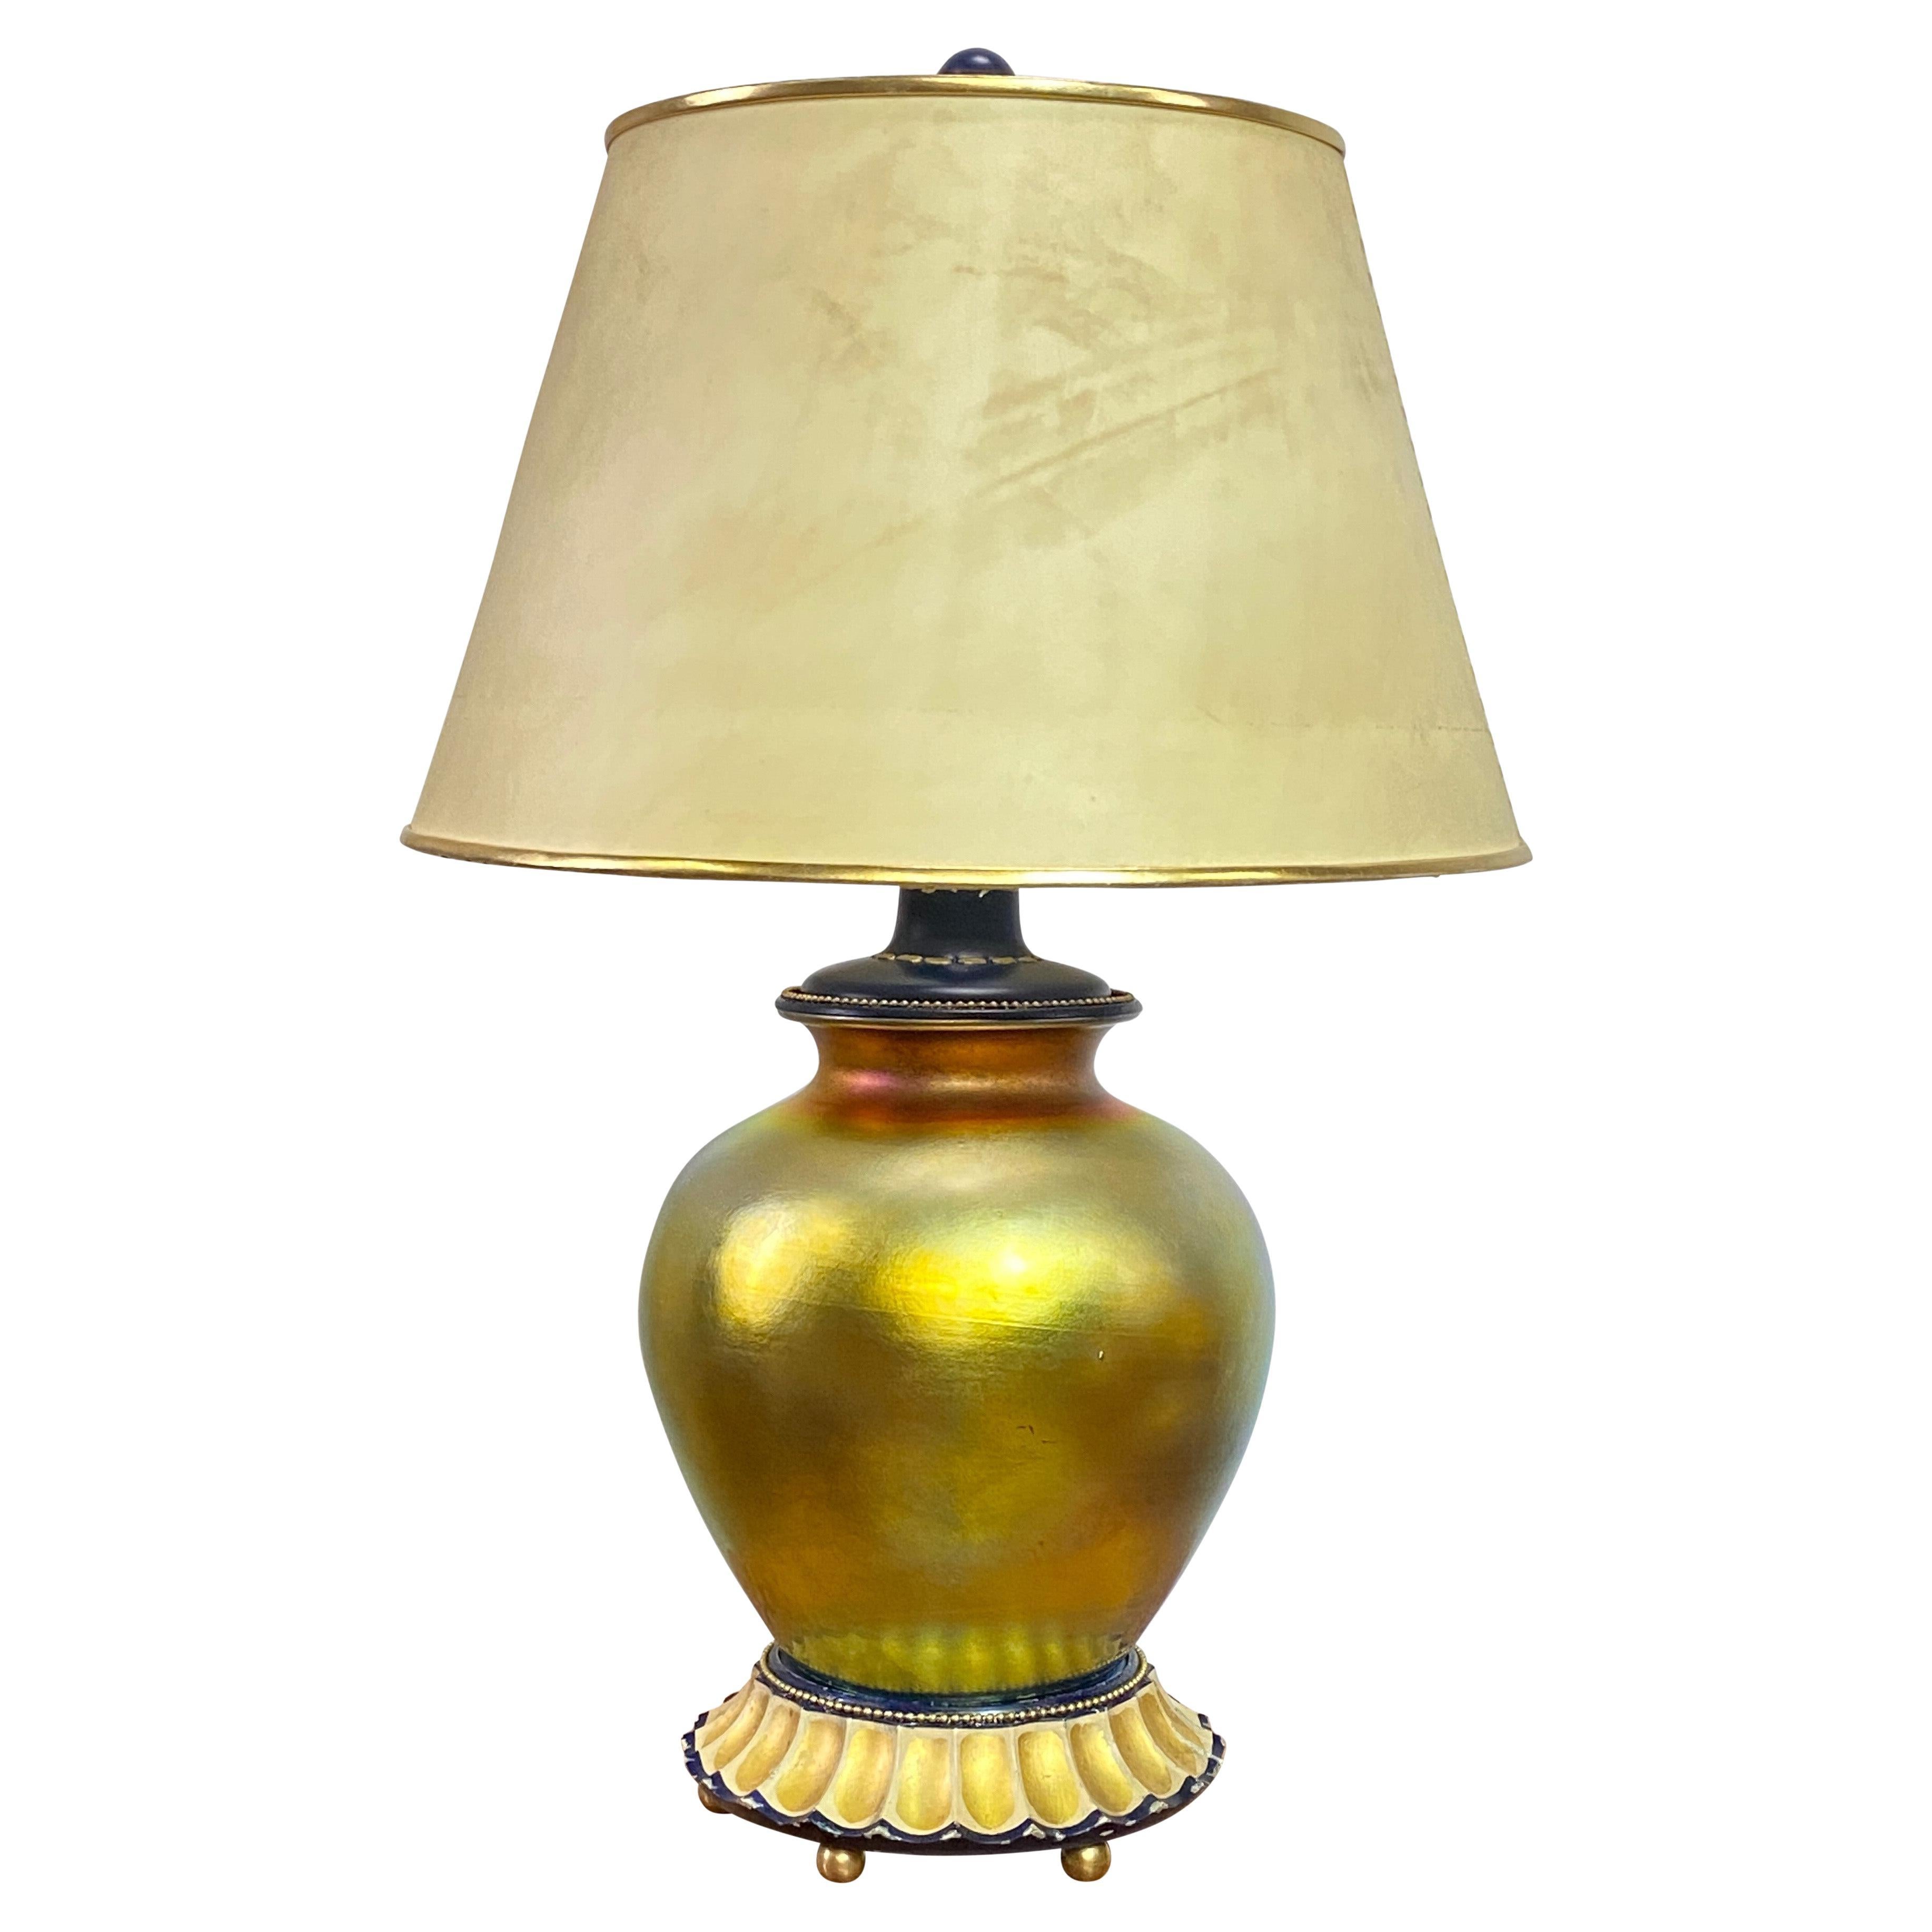 Antique Steuben Gold Aurene Art Glass Table Lamp, Early 20th Century For Sale